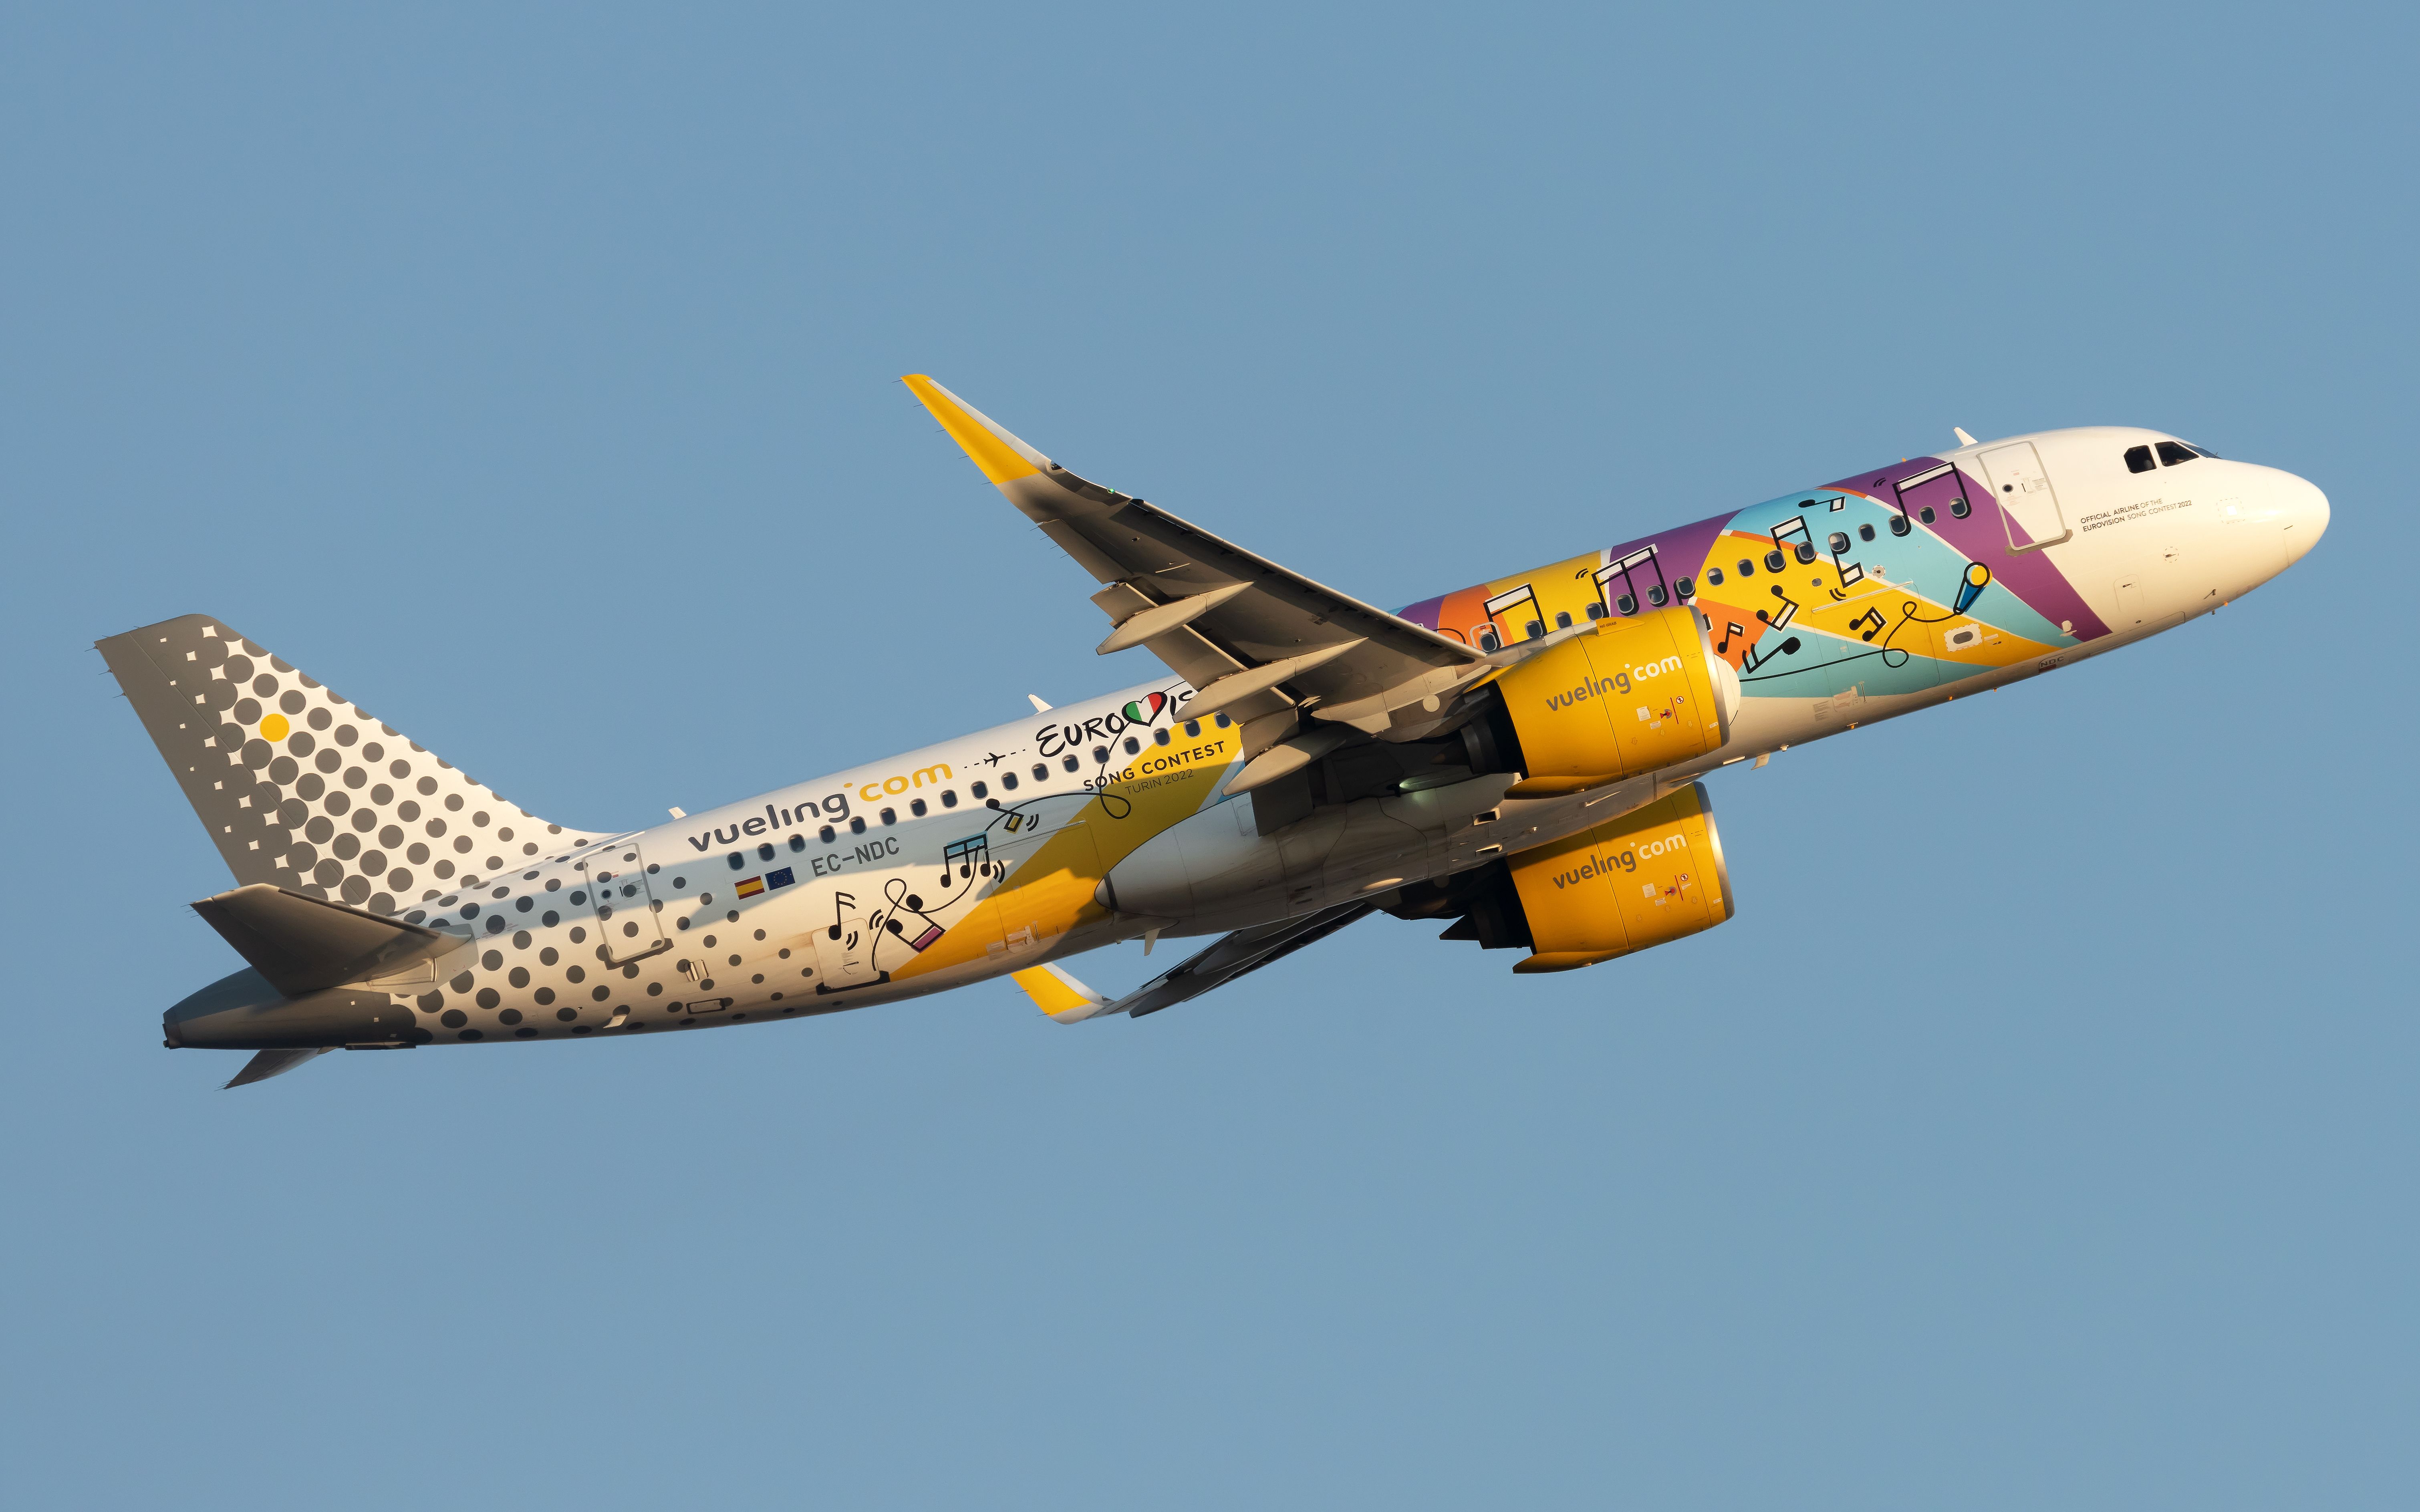 A Vueling Airbus A320neo aircraft with the Eurovision Song Contest 2022 Livery.